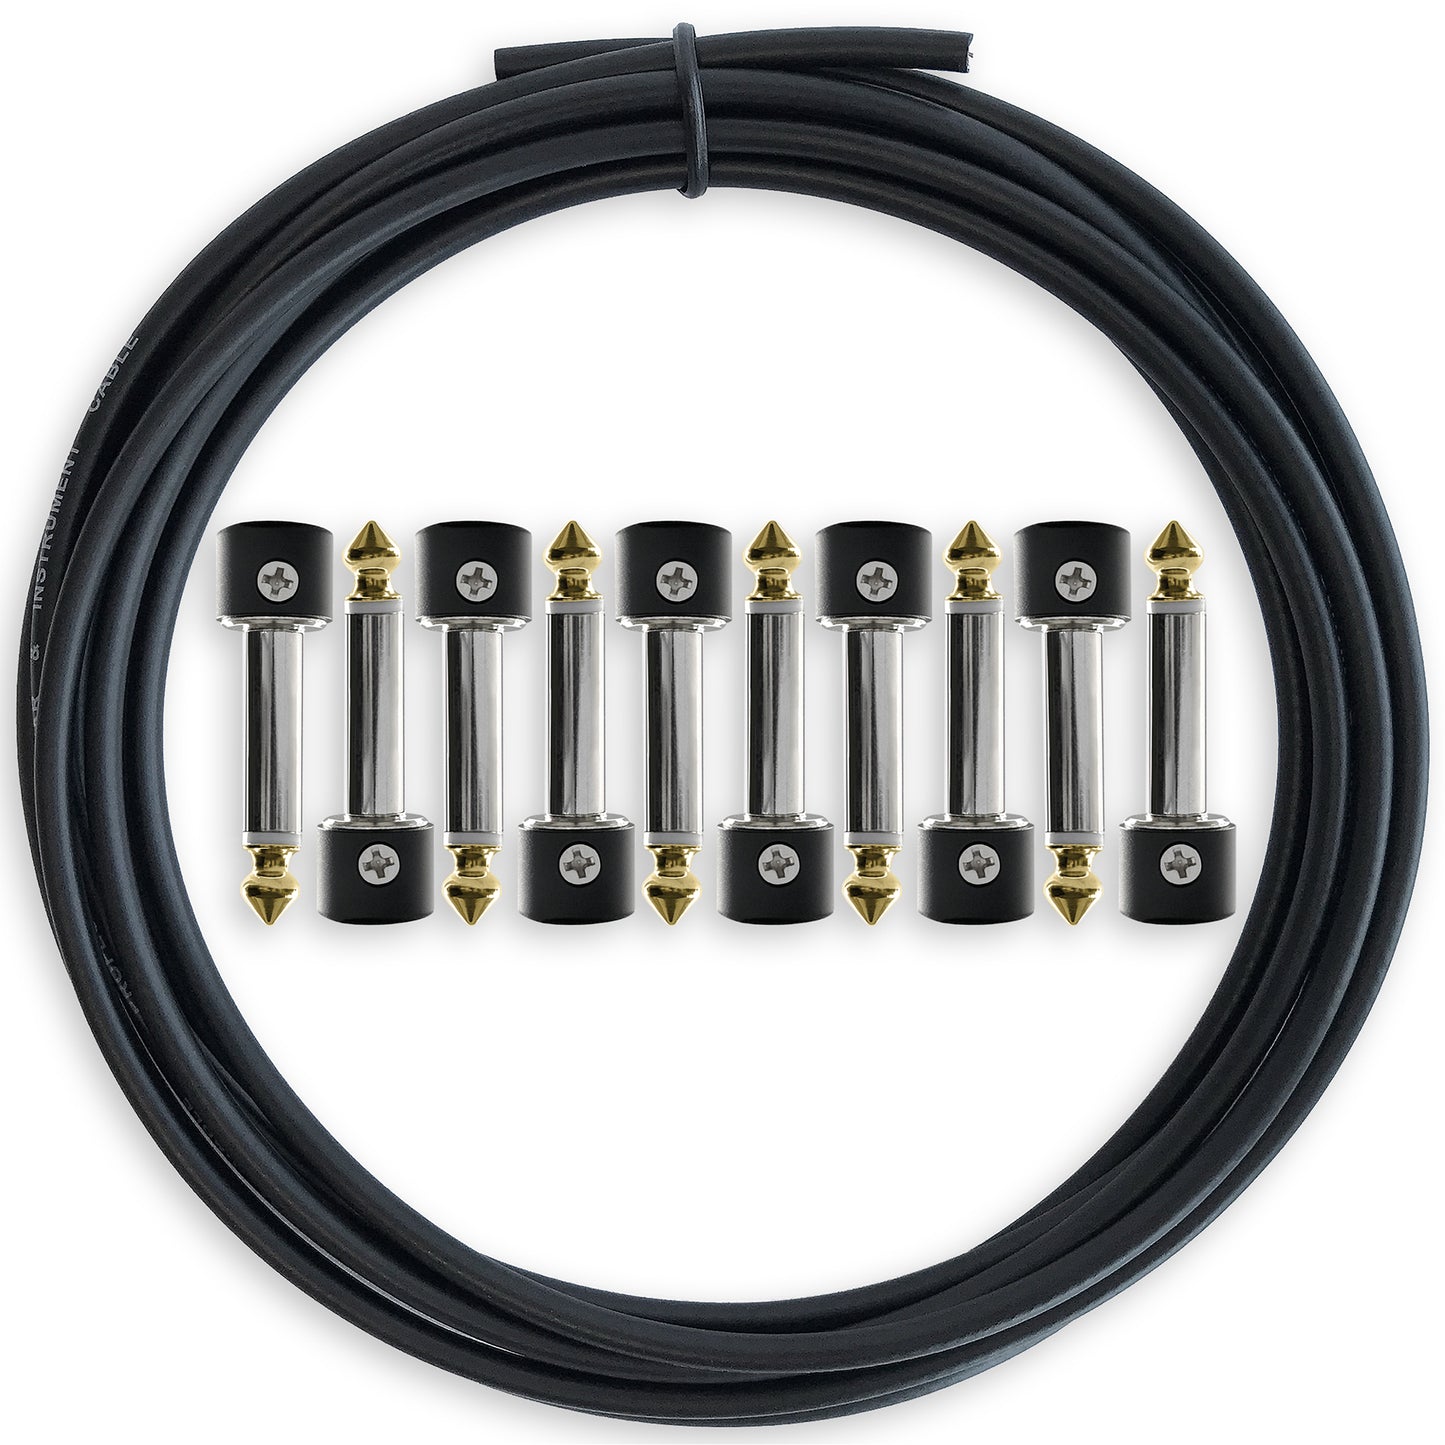 The Solderless Pedalboard Cable Kit